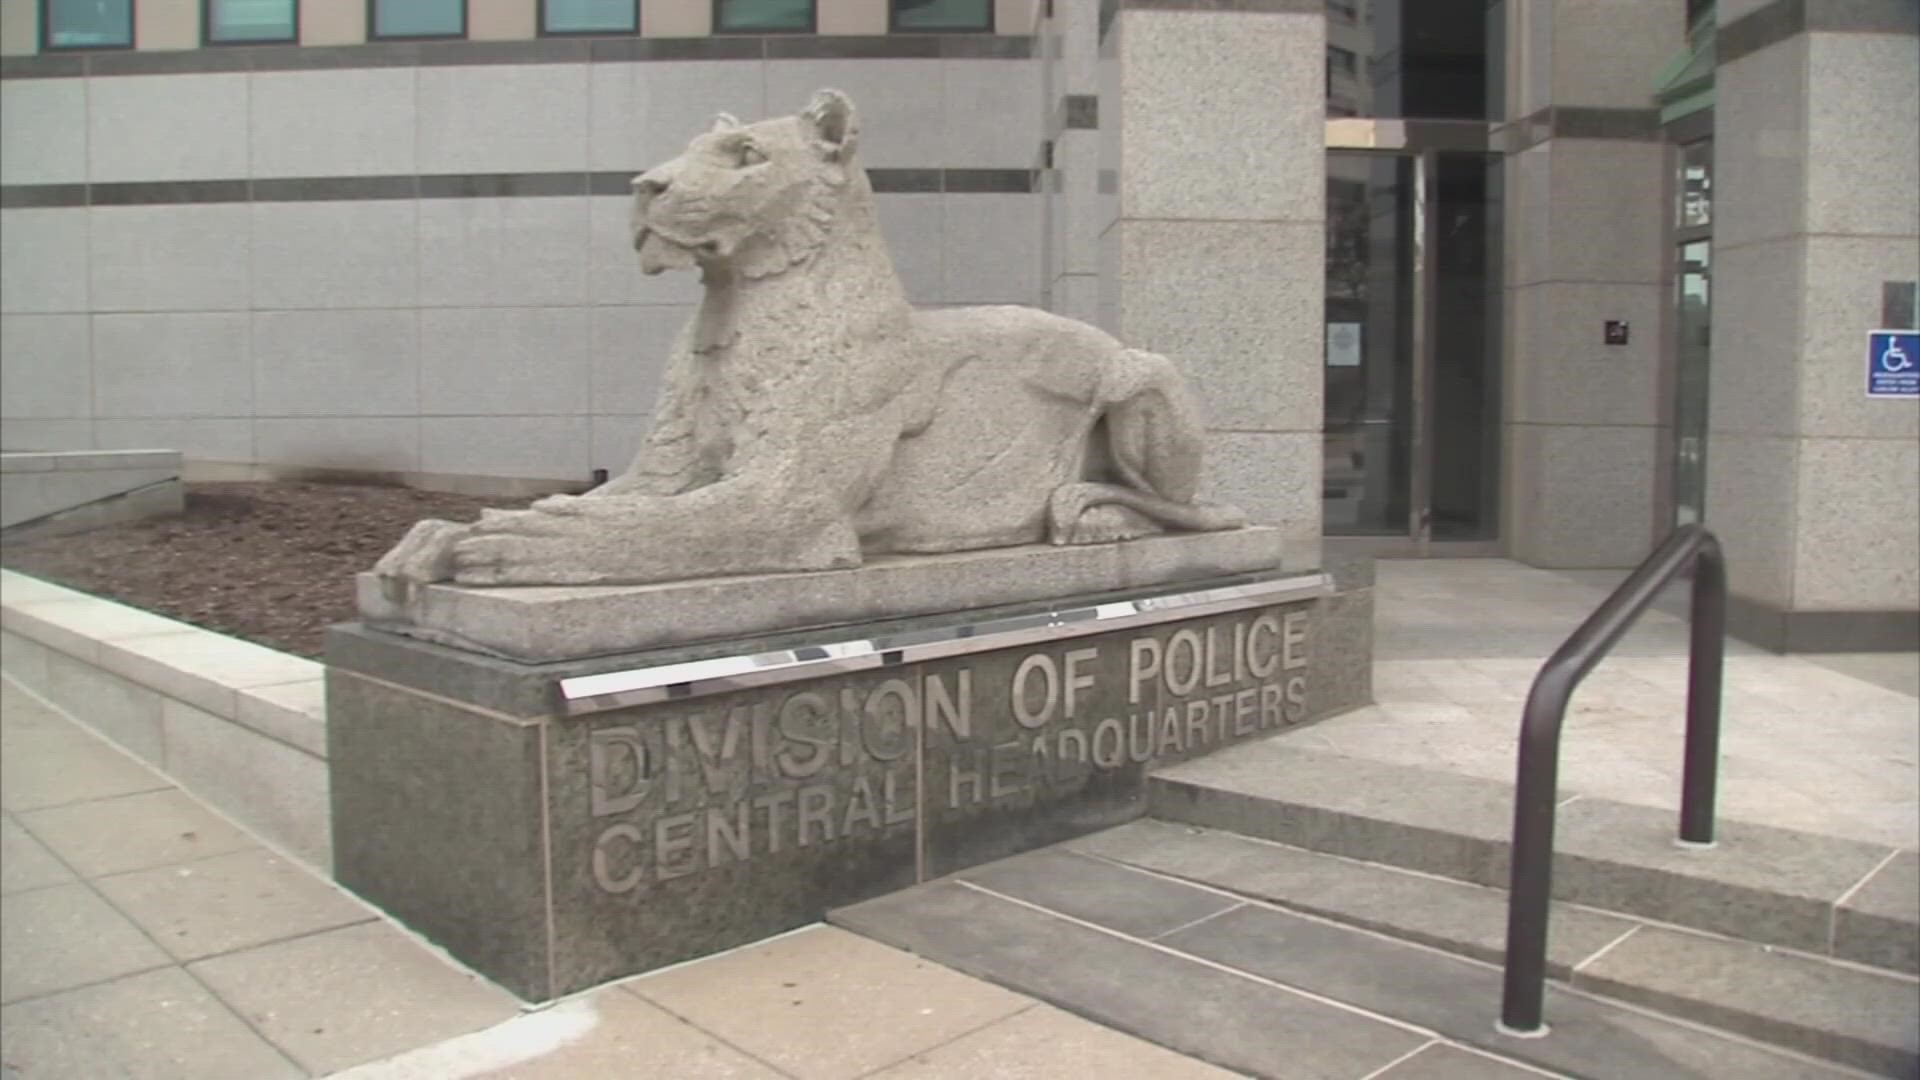 Community members call for an investigation into Columbus police's "use of force" history.